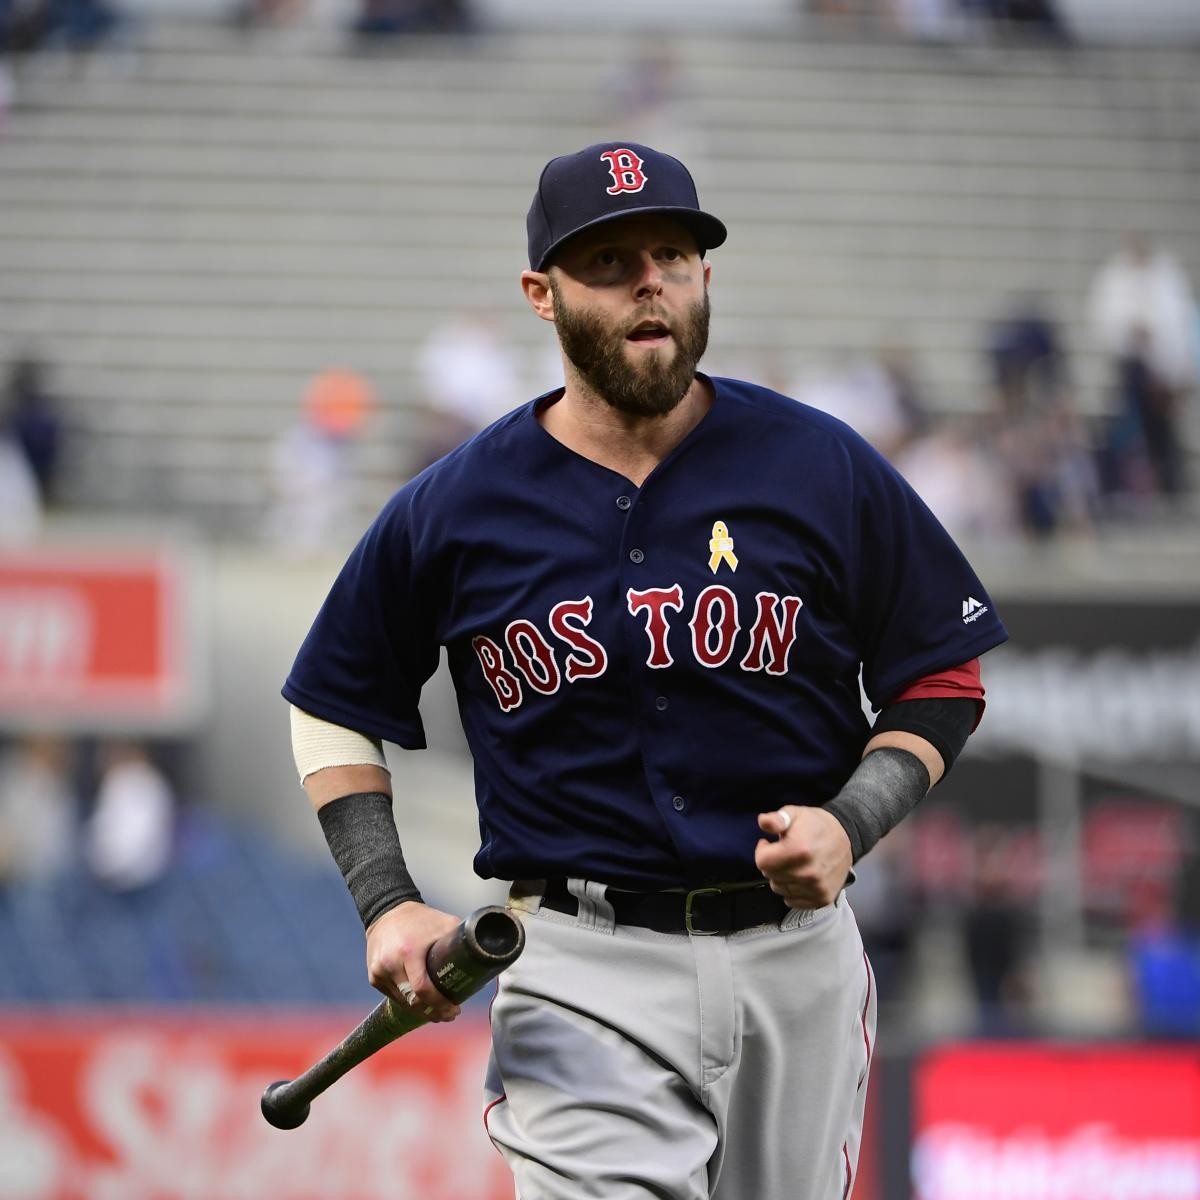 Dustin Pedroia Says Sign Stealing Is 'Part of the Game'